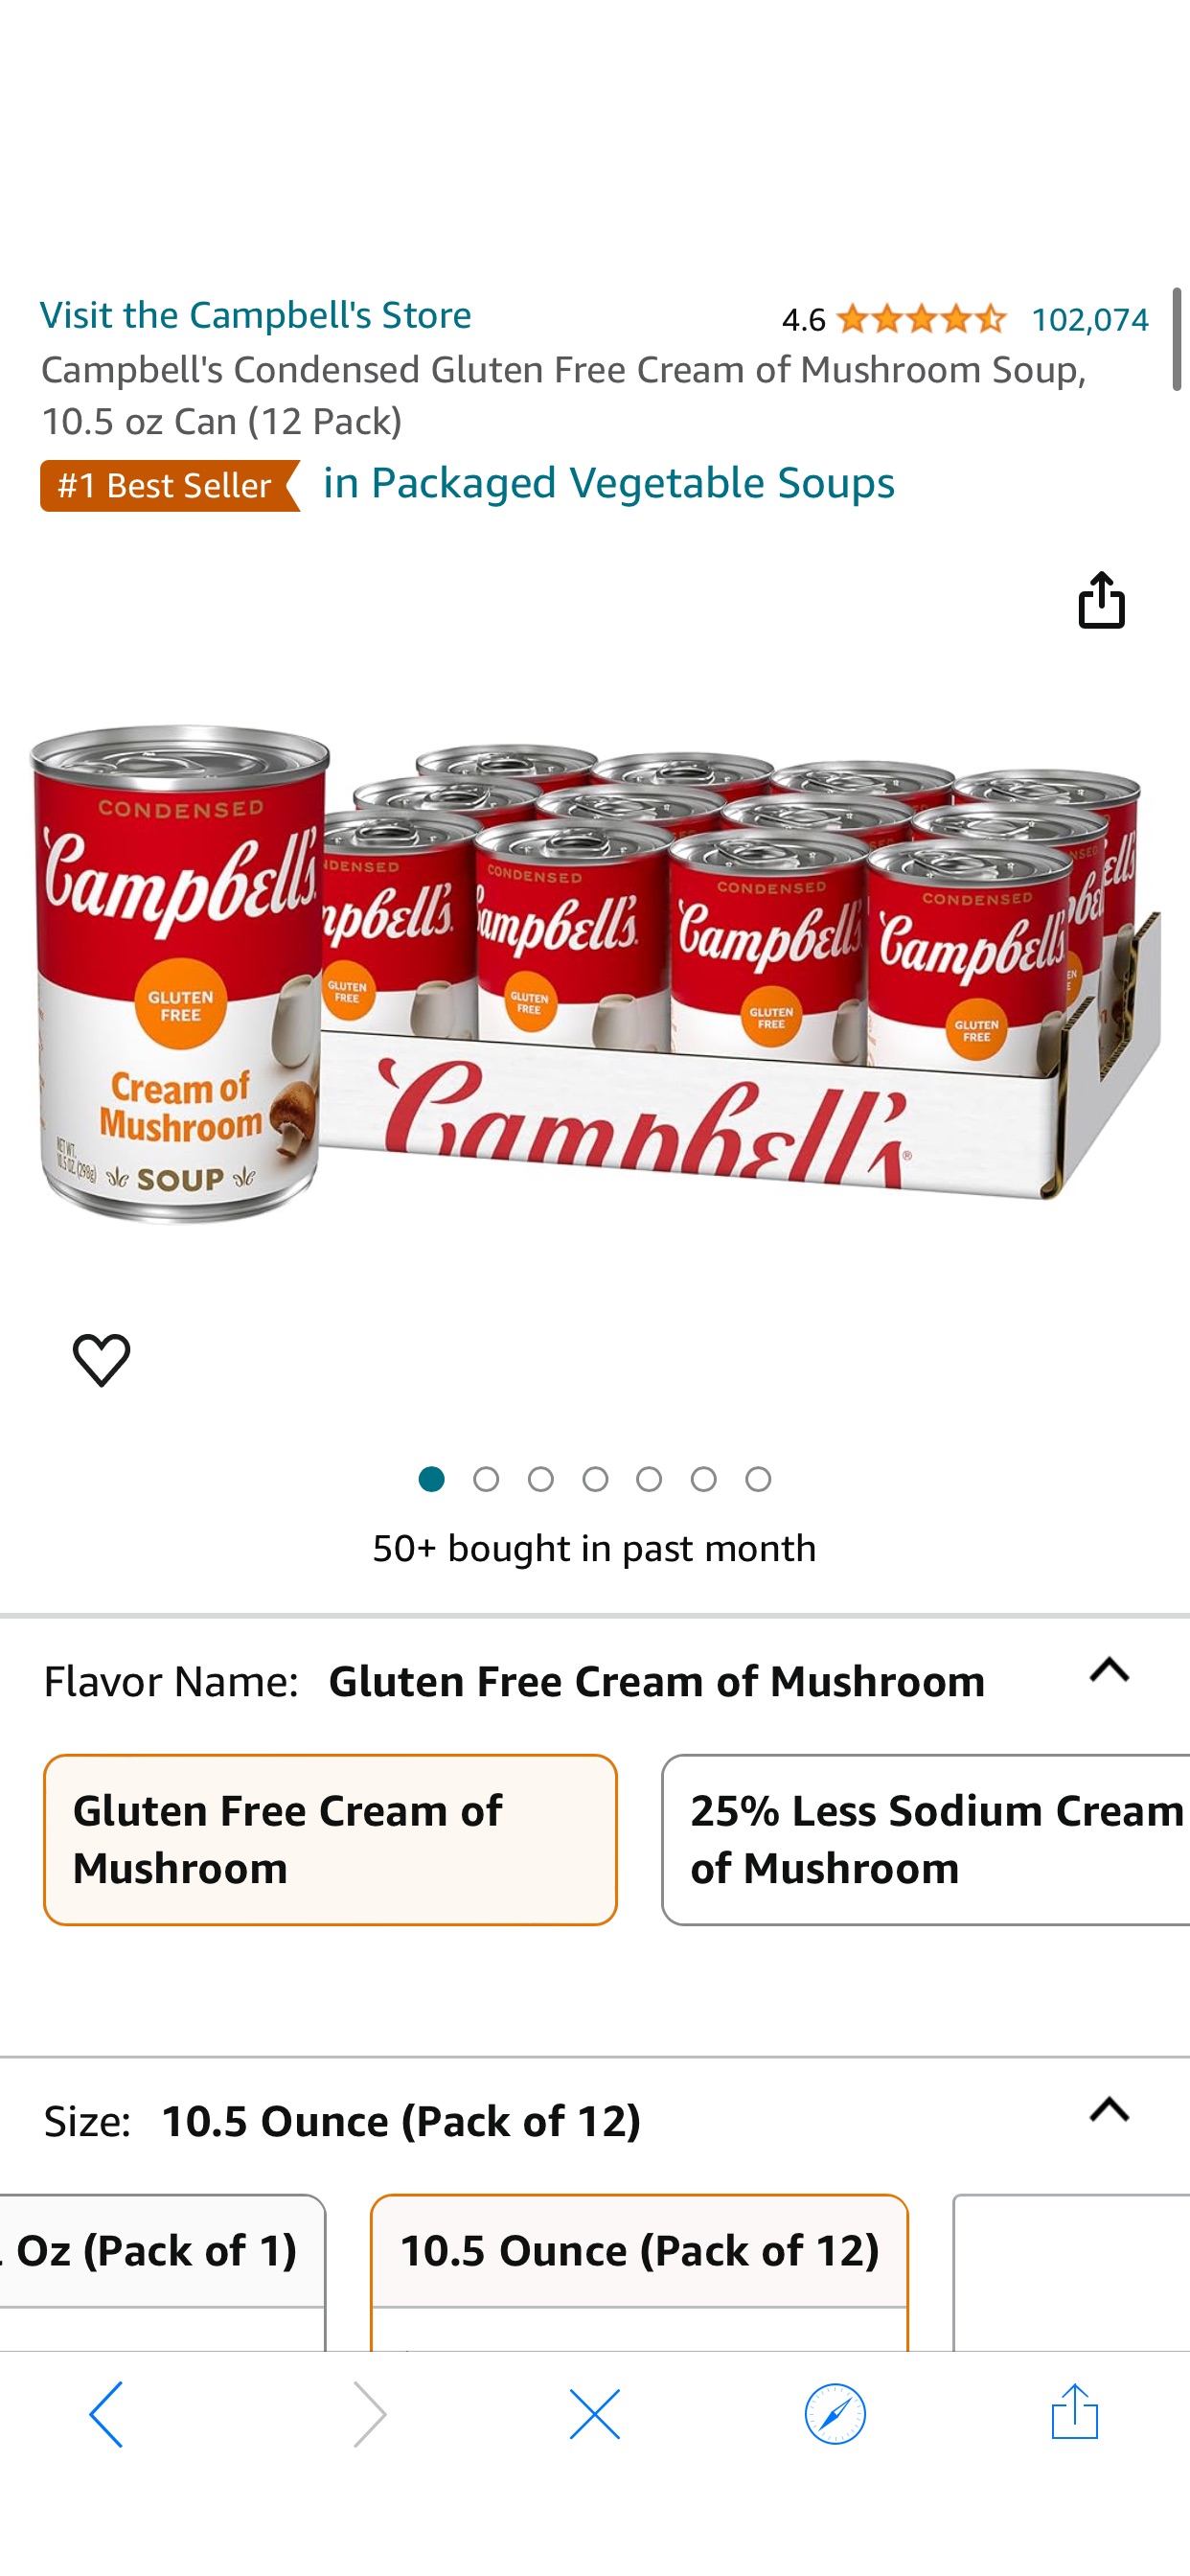 Amazon.com : Campbell's Condensed Gluten Free Cream of Mushroom Soup, 10.5 oz Can (12 Pack) : Grocery & Gourmet Food 奶油蘑菇汤